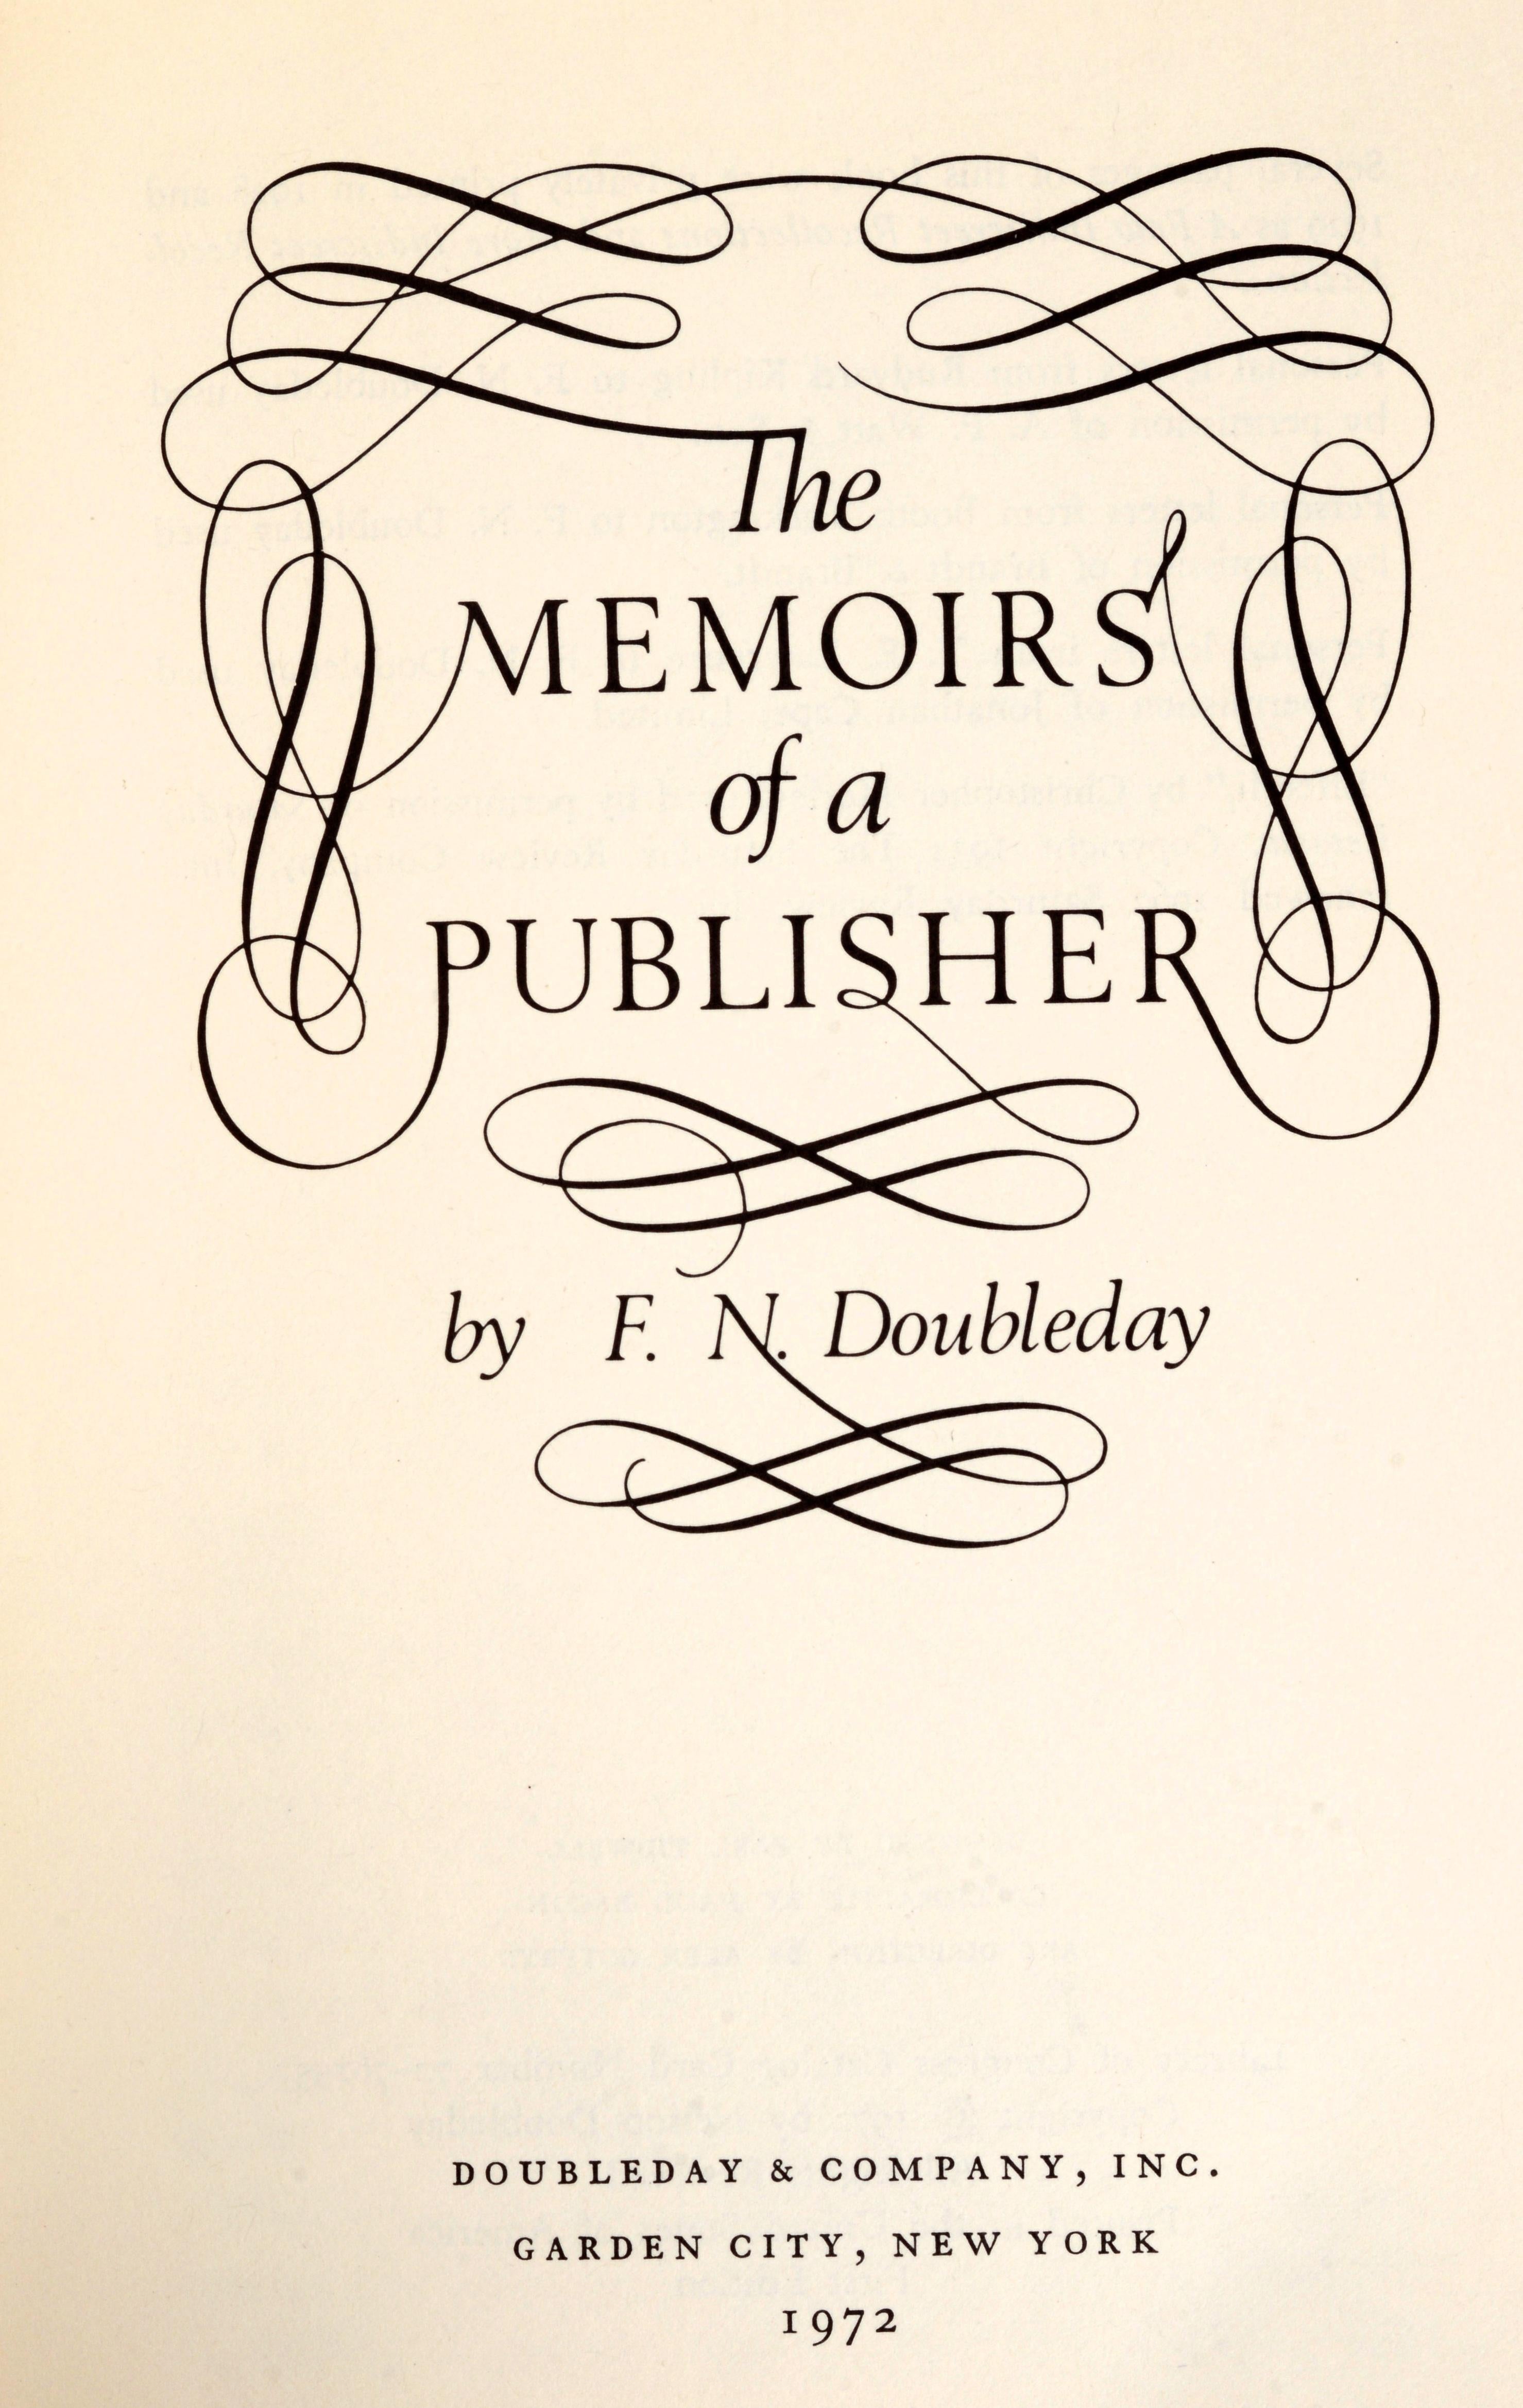 Memoirs of a Publisher by F. N. Doubleday. Published by Doubleday and Co., 1972. Stated 1st Ed hardcover. This is the memoirs of Frank Nelson Doubleday, owner of the publishing company 